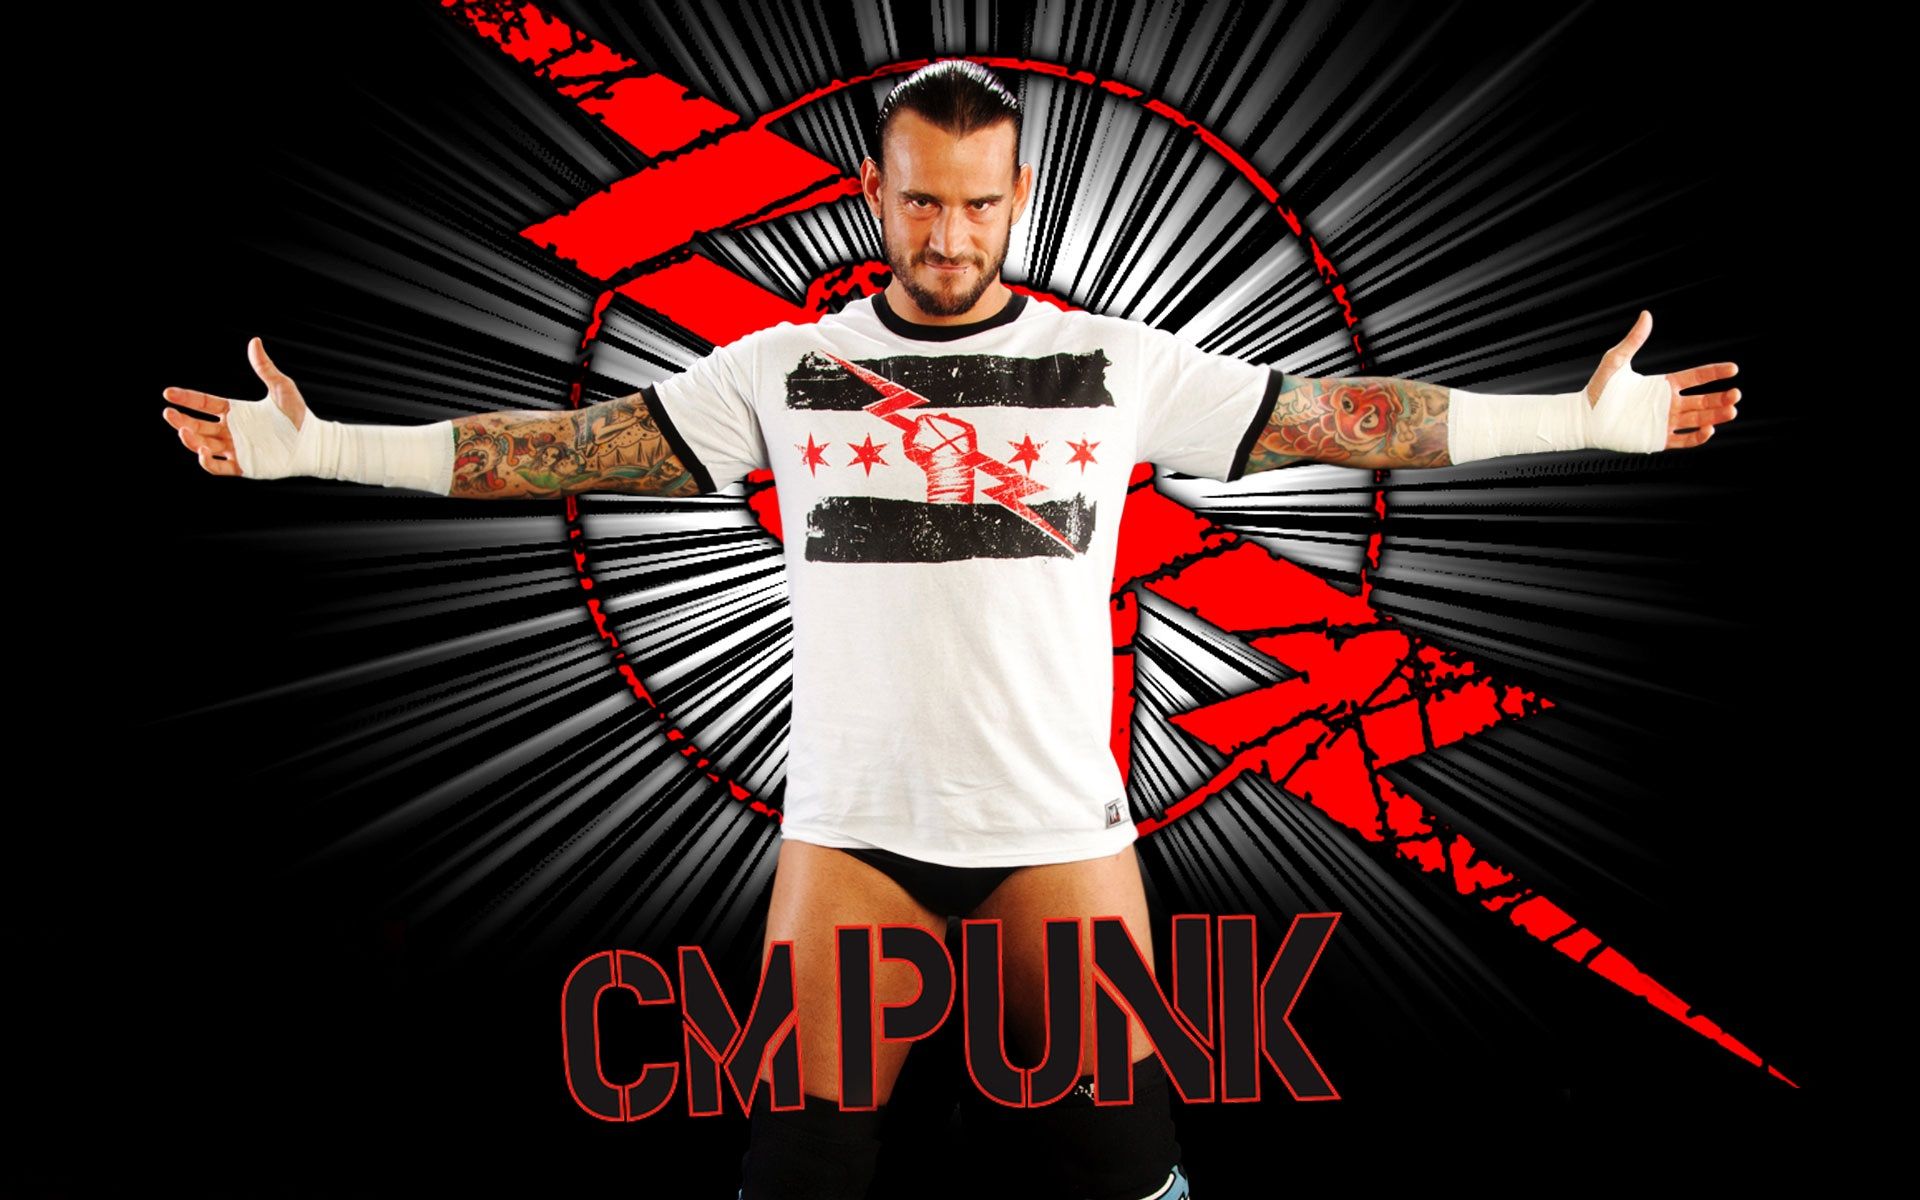 WWE CM Punk: Best In The World Wallpapers - Wallpaper Cave